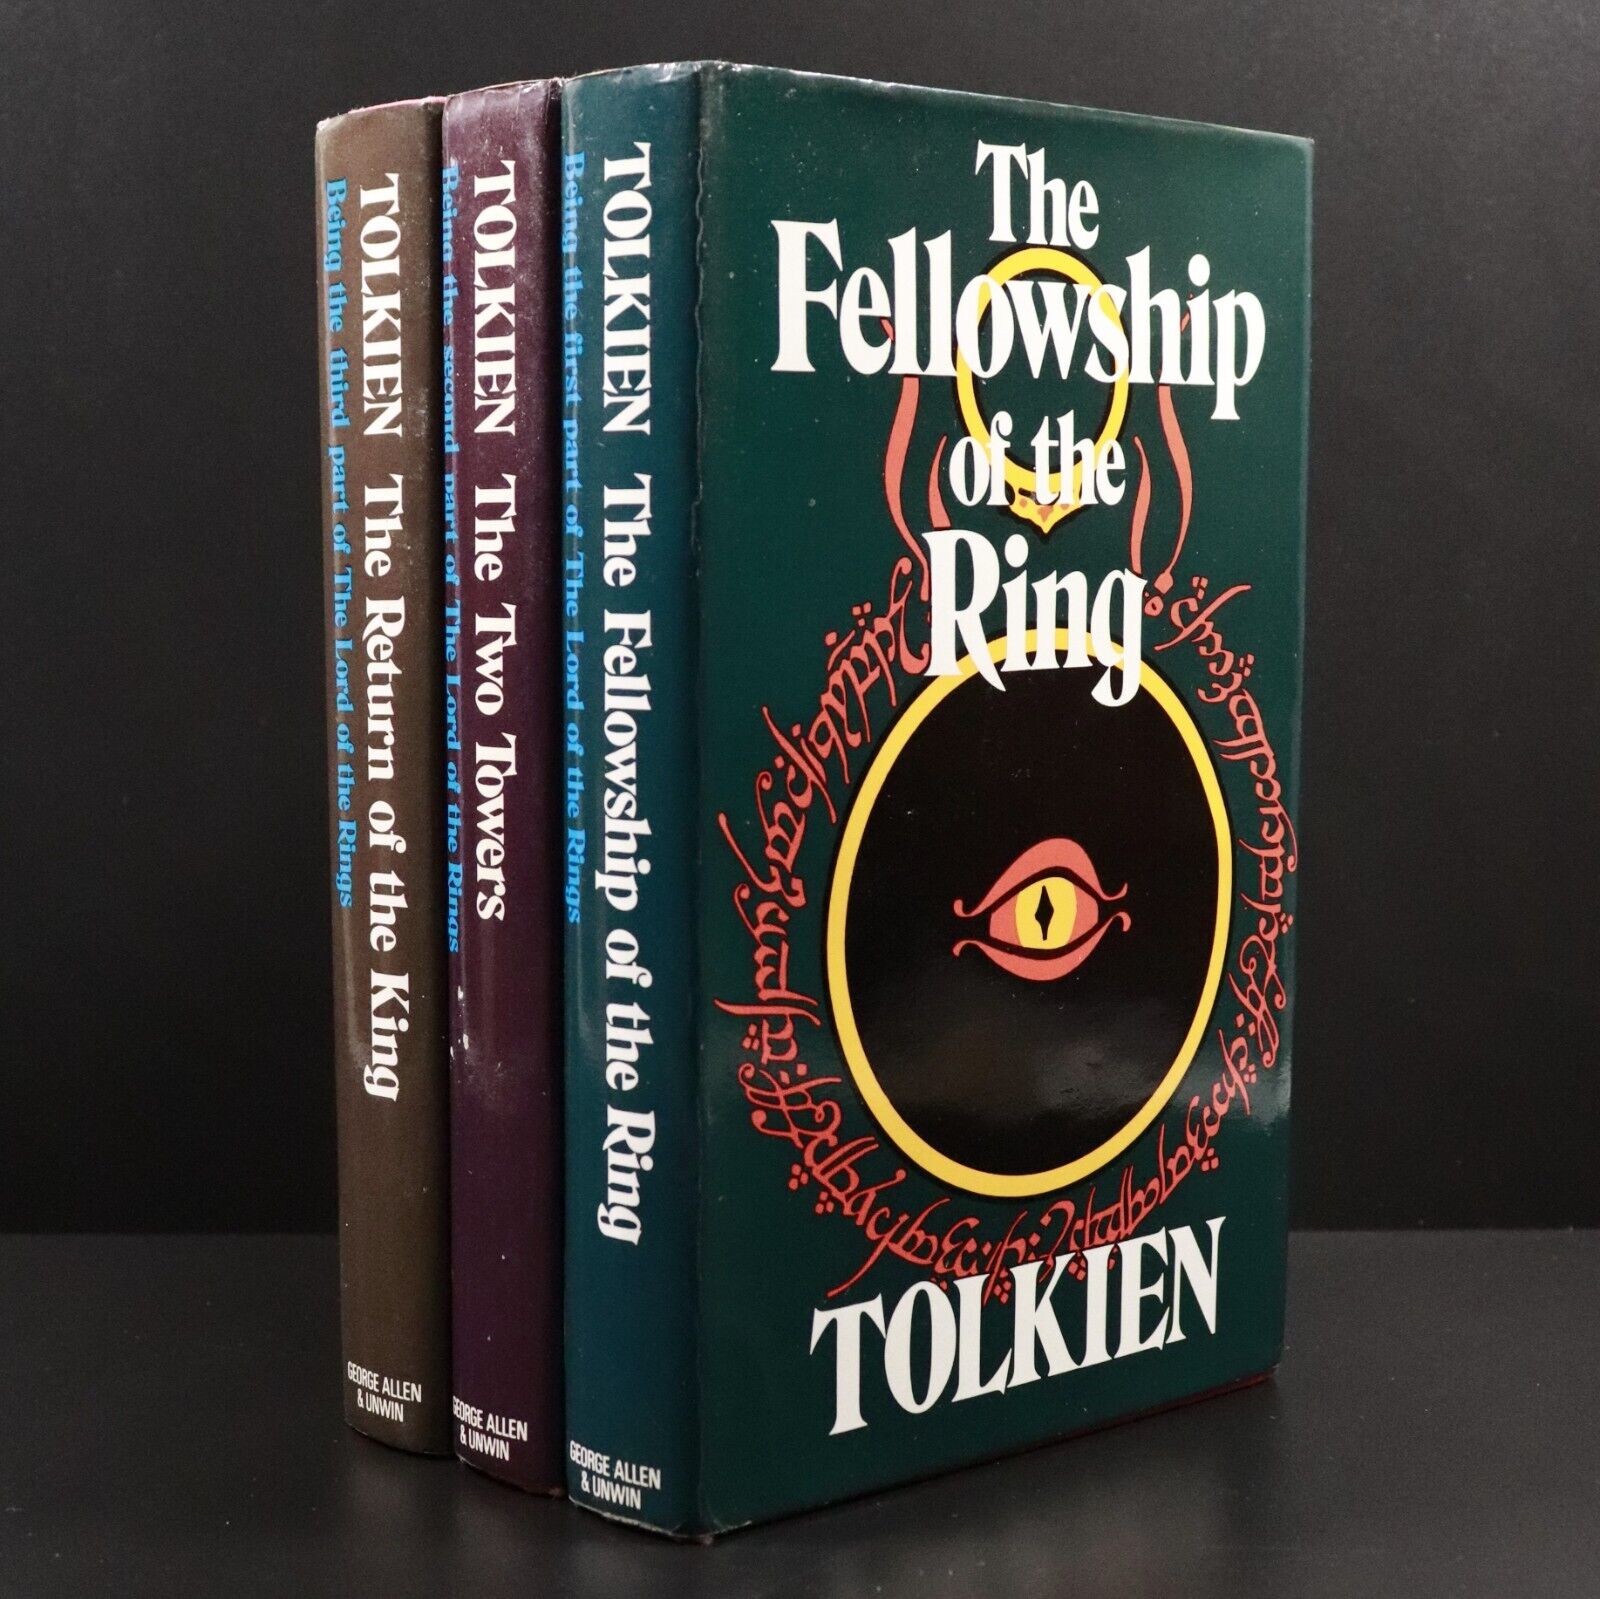 1973 3vol The Lord Of The Rings by J.R.R. Tolkien Fantasy Fiction Book Set